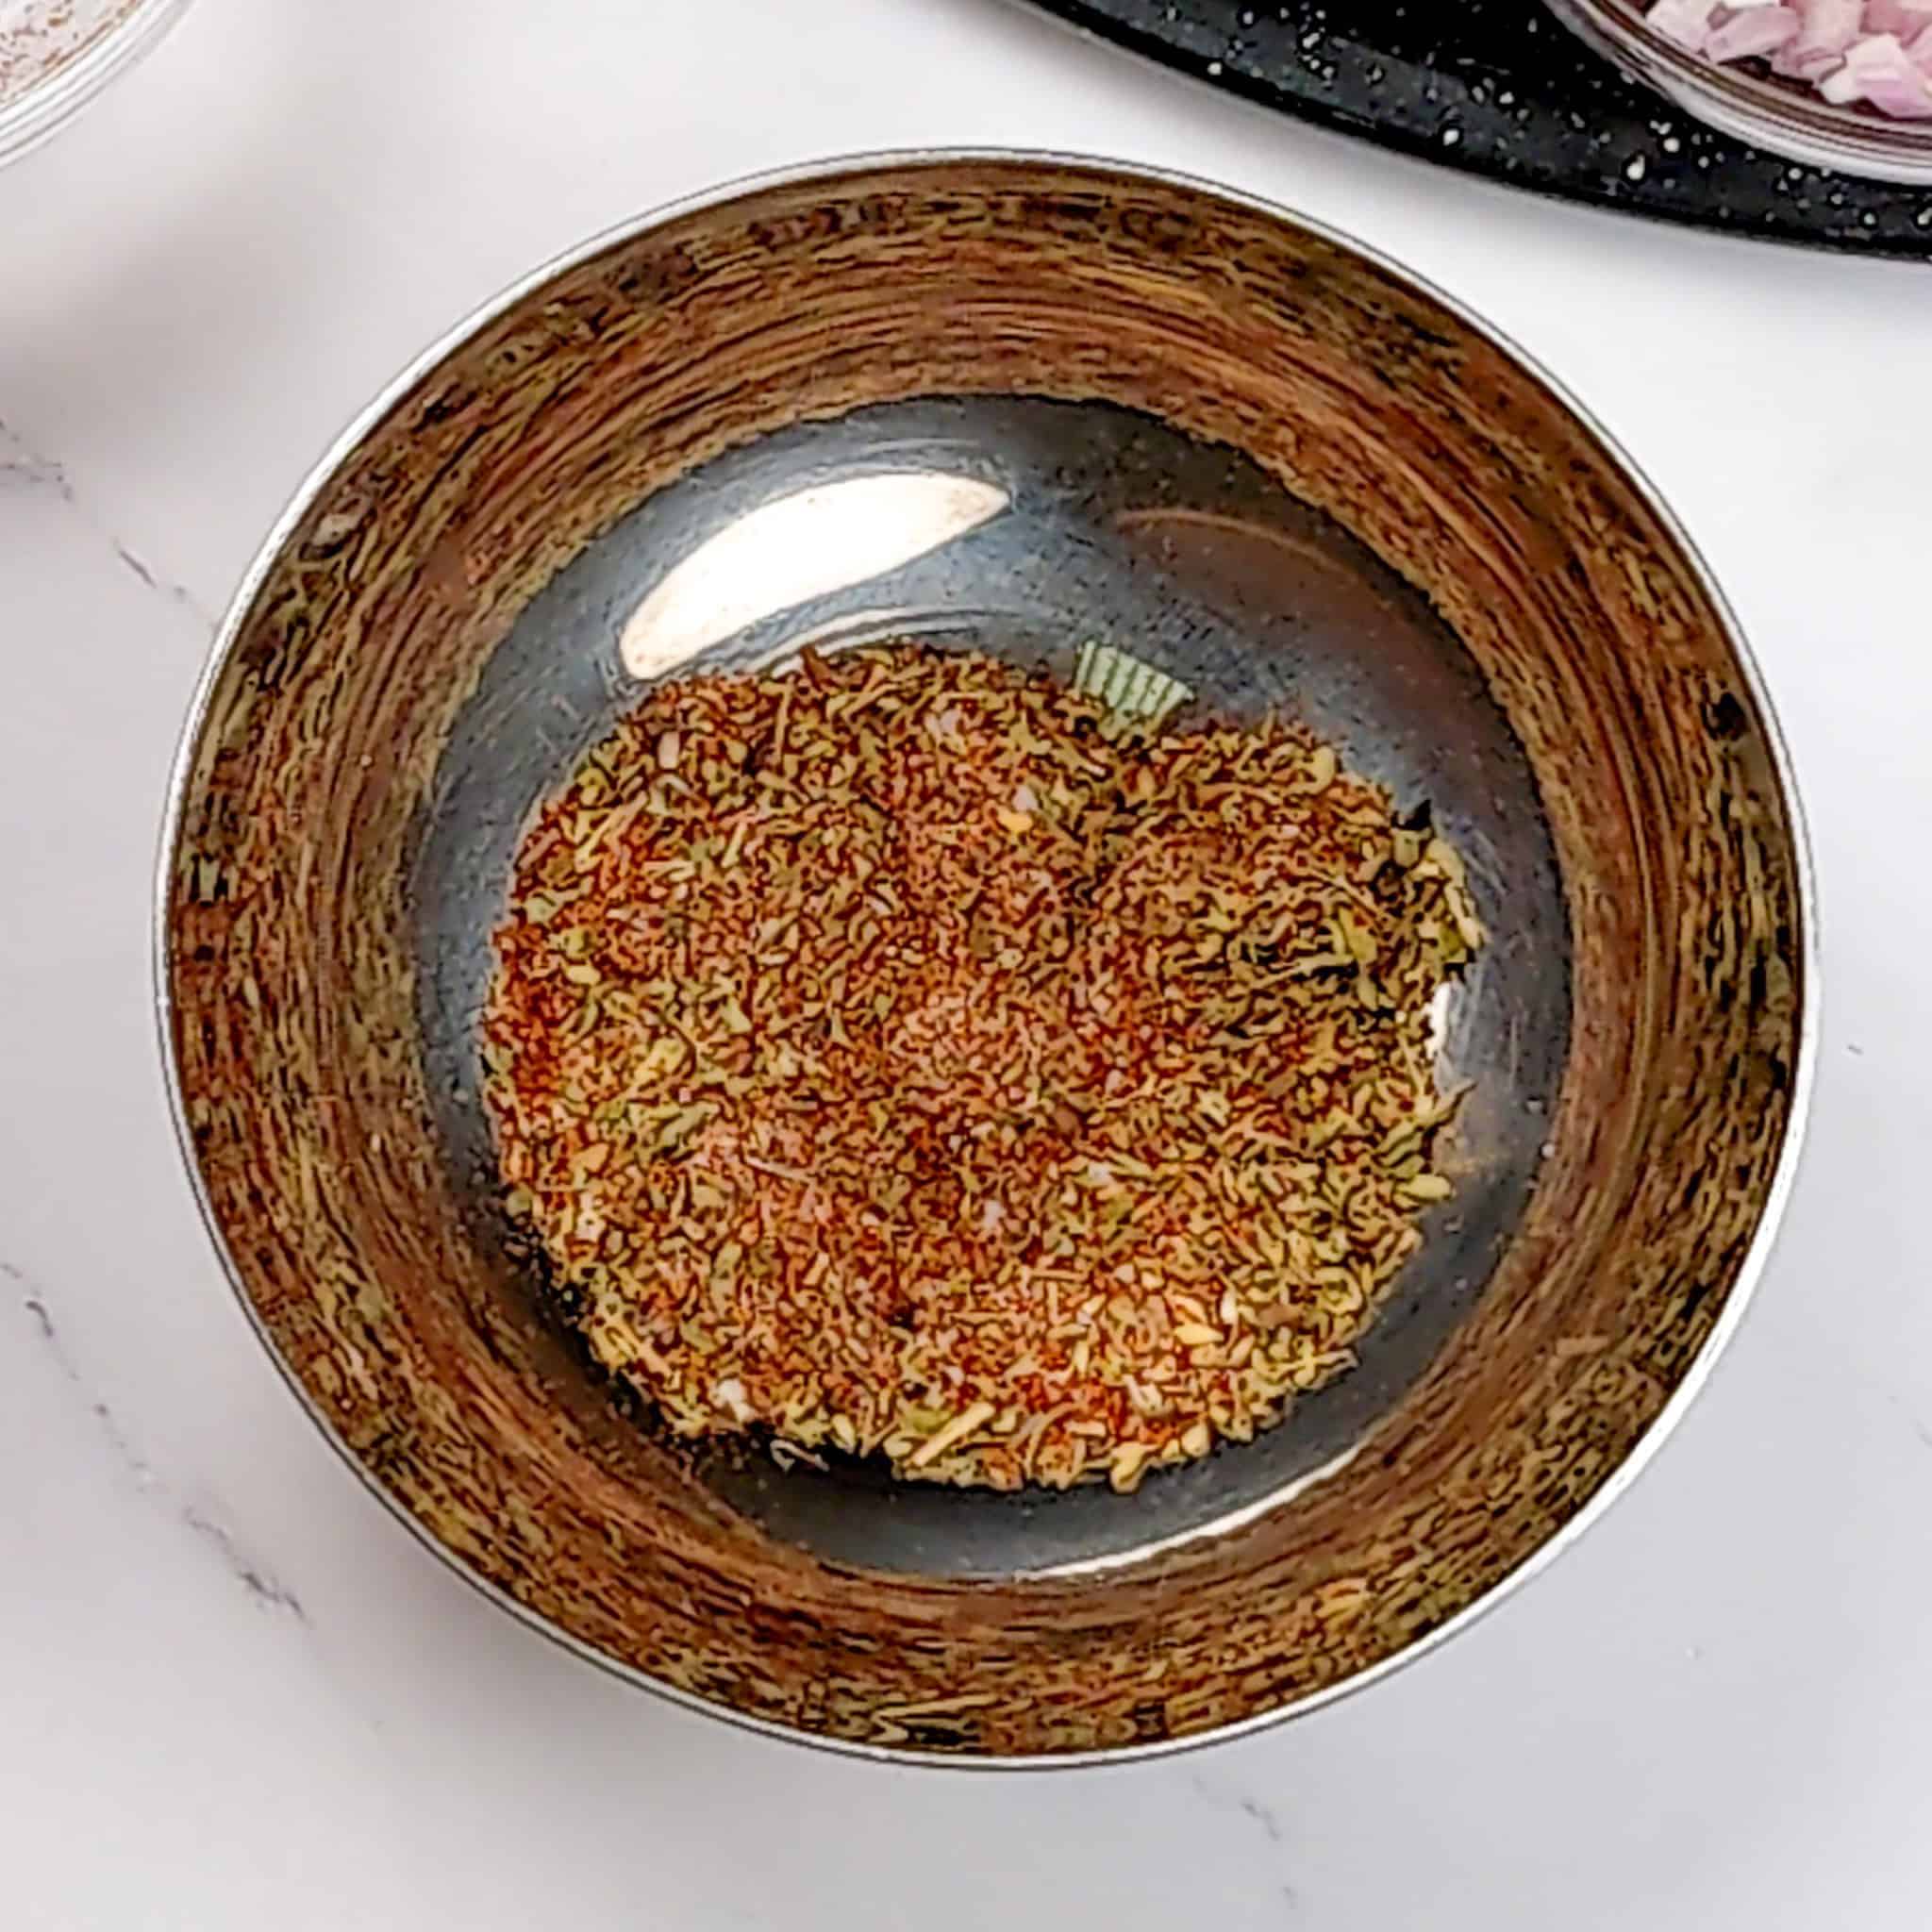 adobo seasoning for the Air Fryer Habanero Adobo Salmon and asparagus in a small stainless steel bowl.